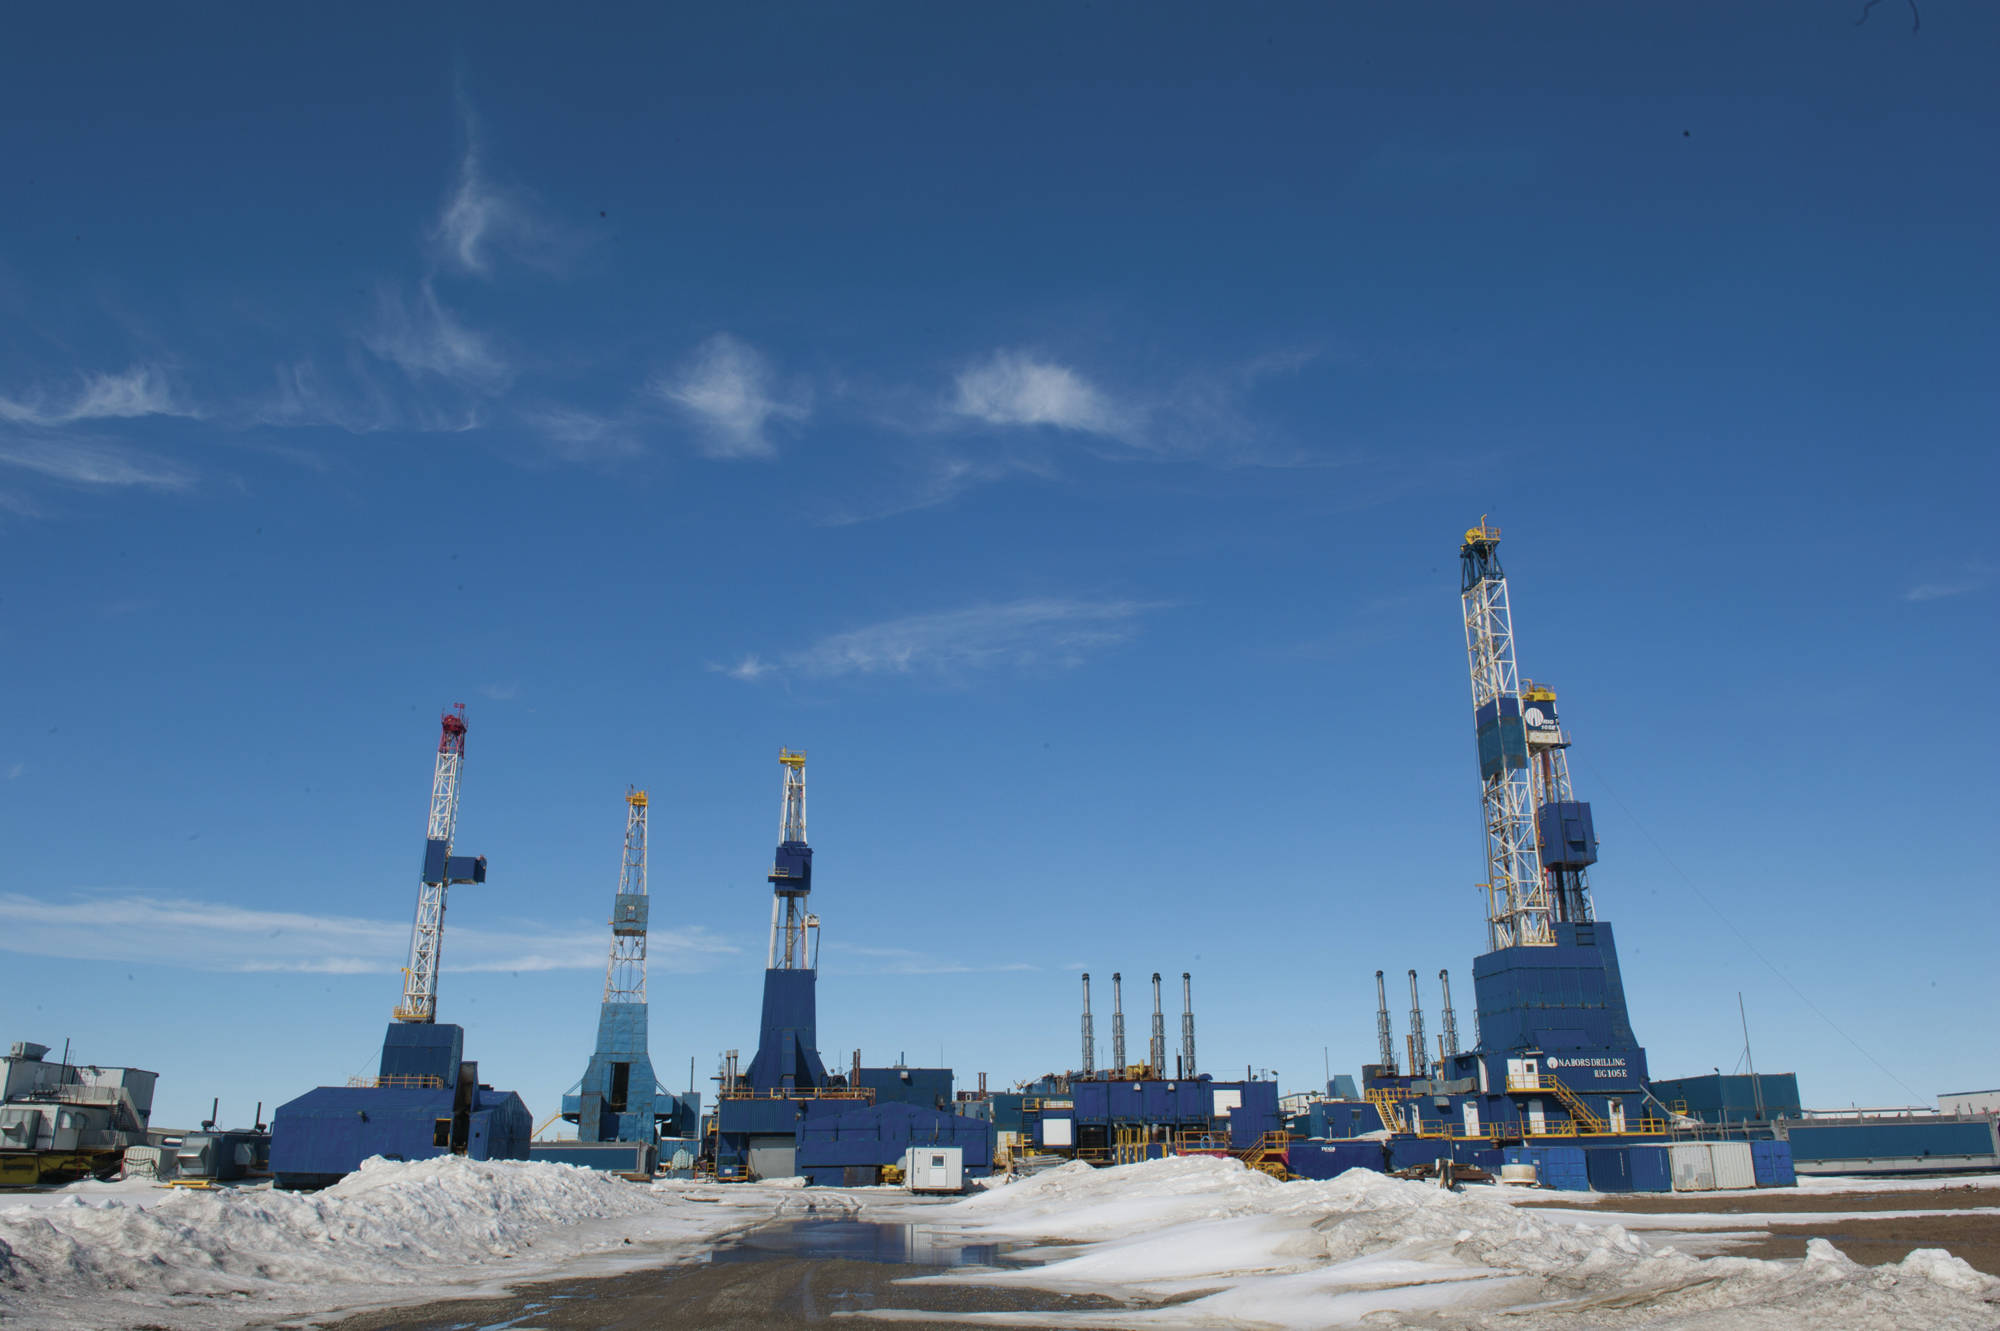 Nabors drilling rigs sit idle at Prudhoe Bay in this May 25 photo. State regulators are working to finalize the method for assessing oil and gas properties for tax value that they have been using for the past several years. The new regulations apply to all oil and gas properties other than the Trans-Alaska Pipeline System. (Photo/Michael Dinneen/For the Journal)